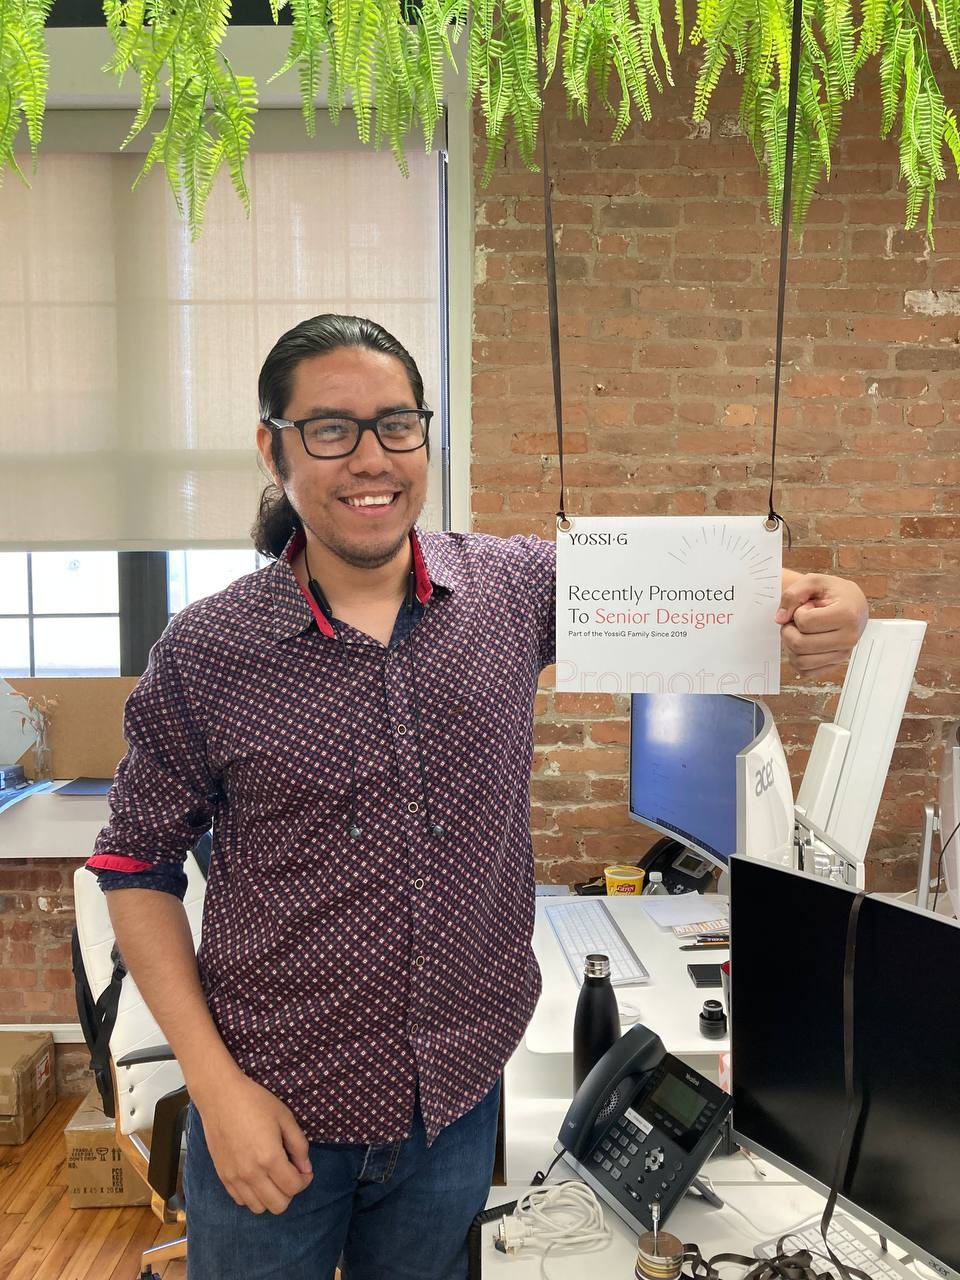 Our designer, Juan, was celebrated with a sign when promoted to Senior Designer. 